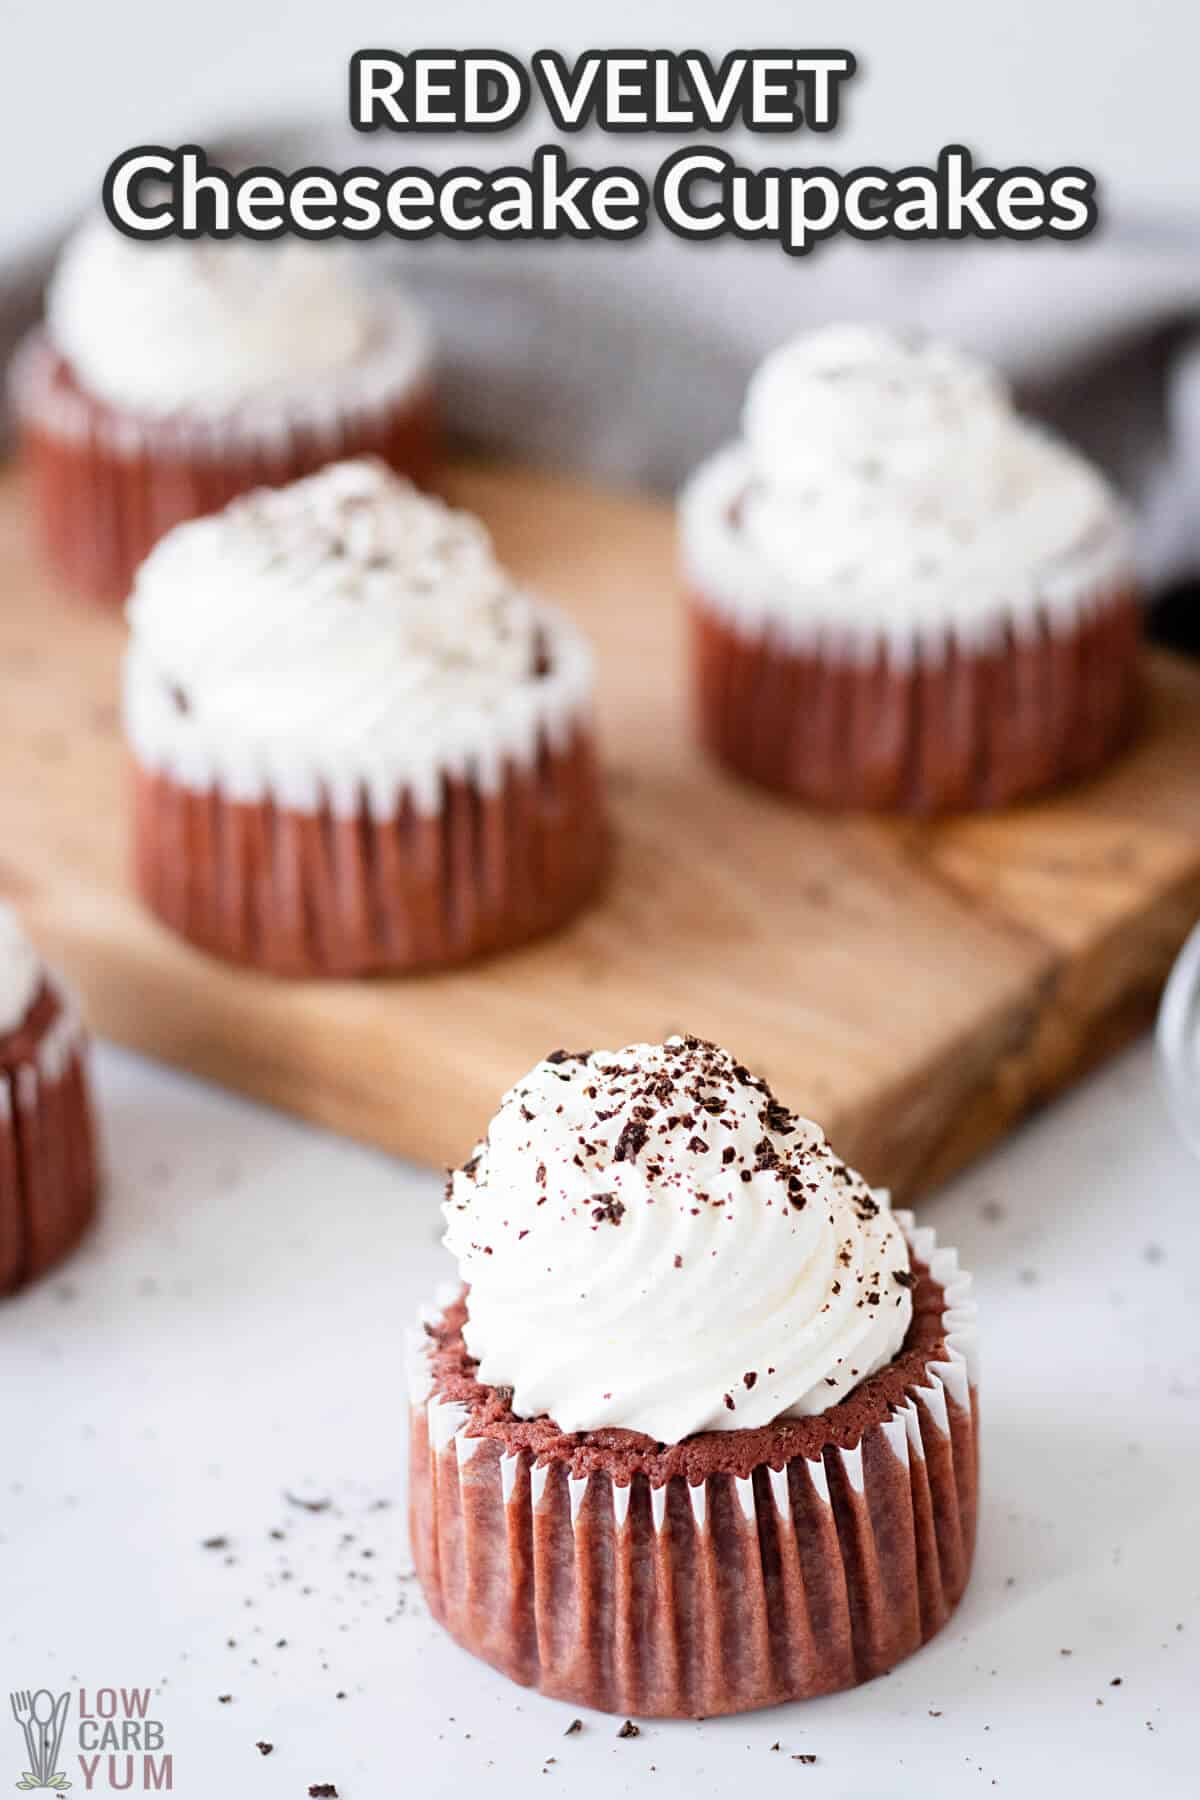 red velvet cheesecake cupcakes recipe image with text overlay